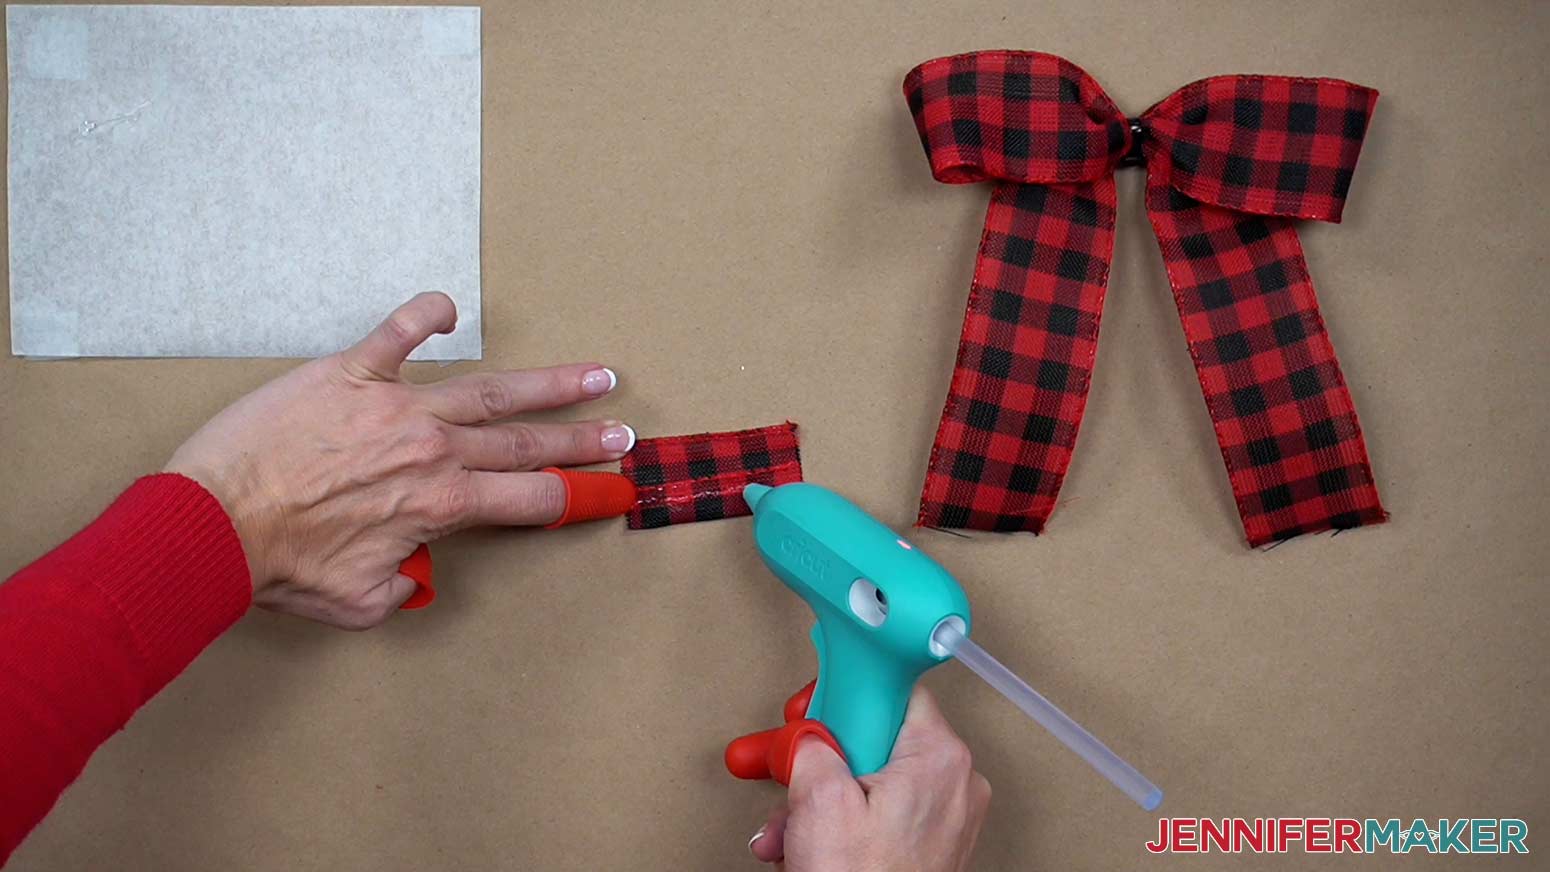 Fold the small rectangle of ribbon onto itself lengthwise and glue to form the top knot.